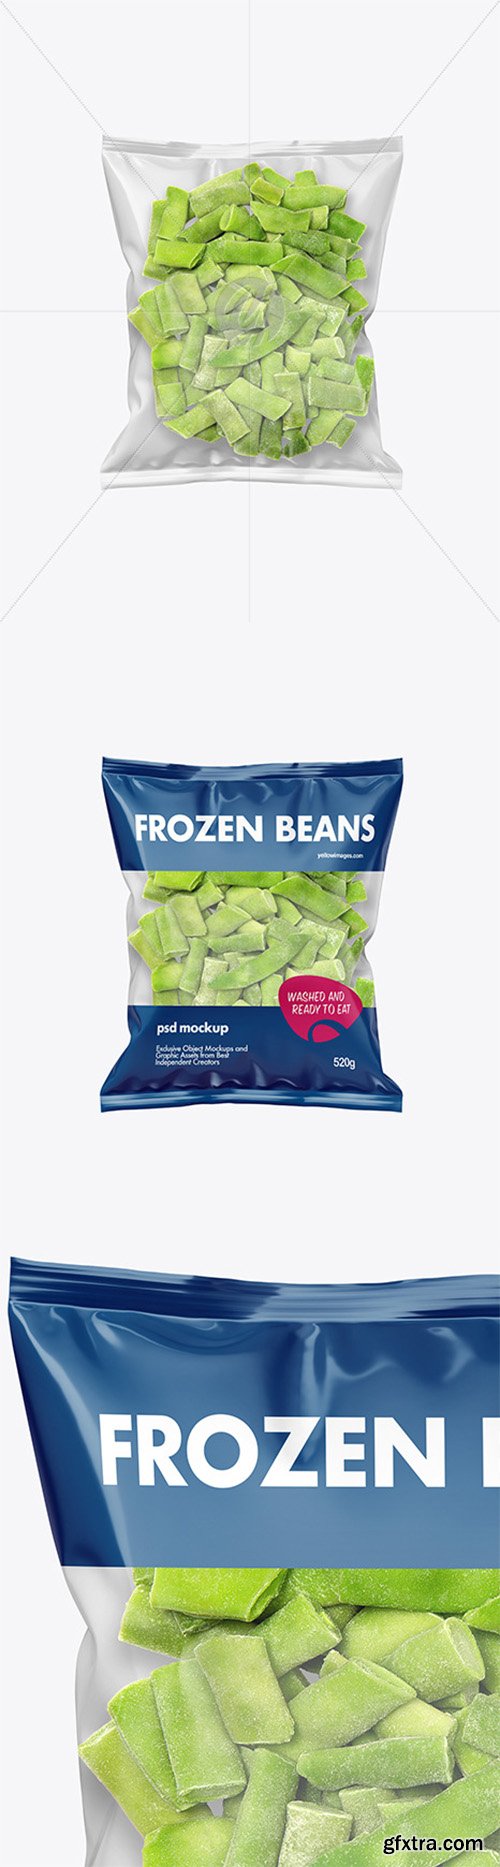 Plastic Bag With Frozen Beans Mockup 52437